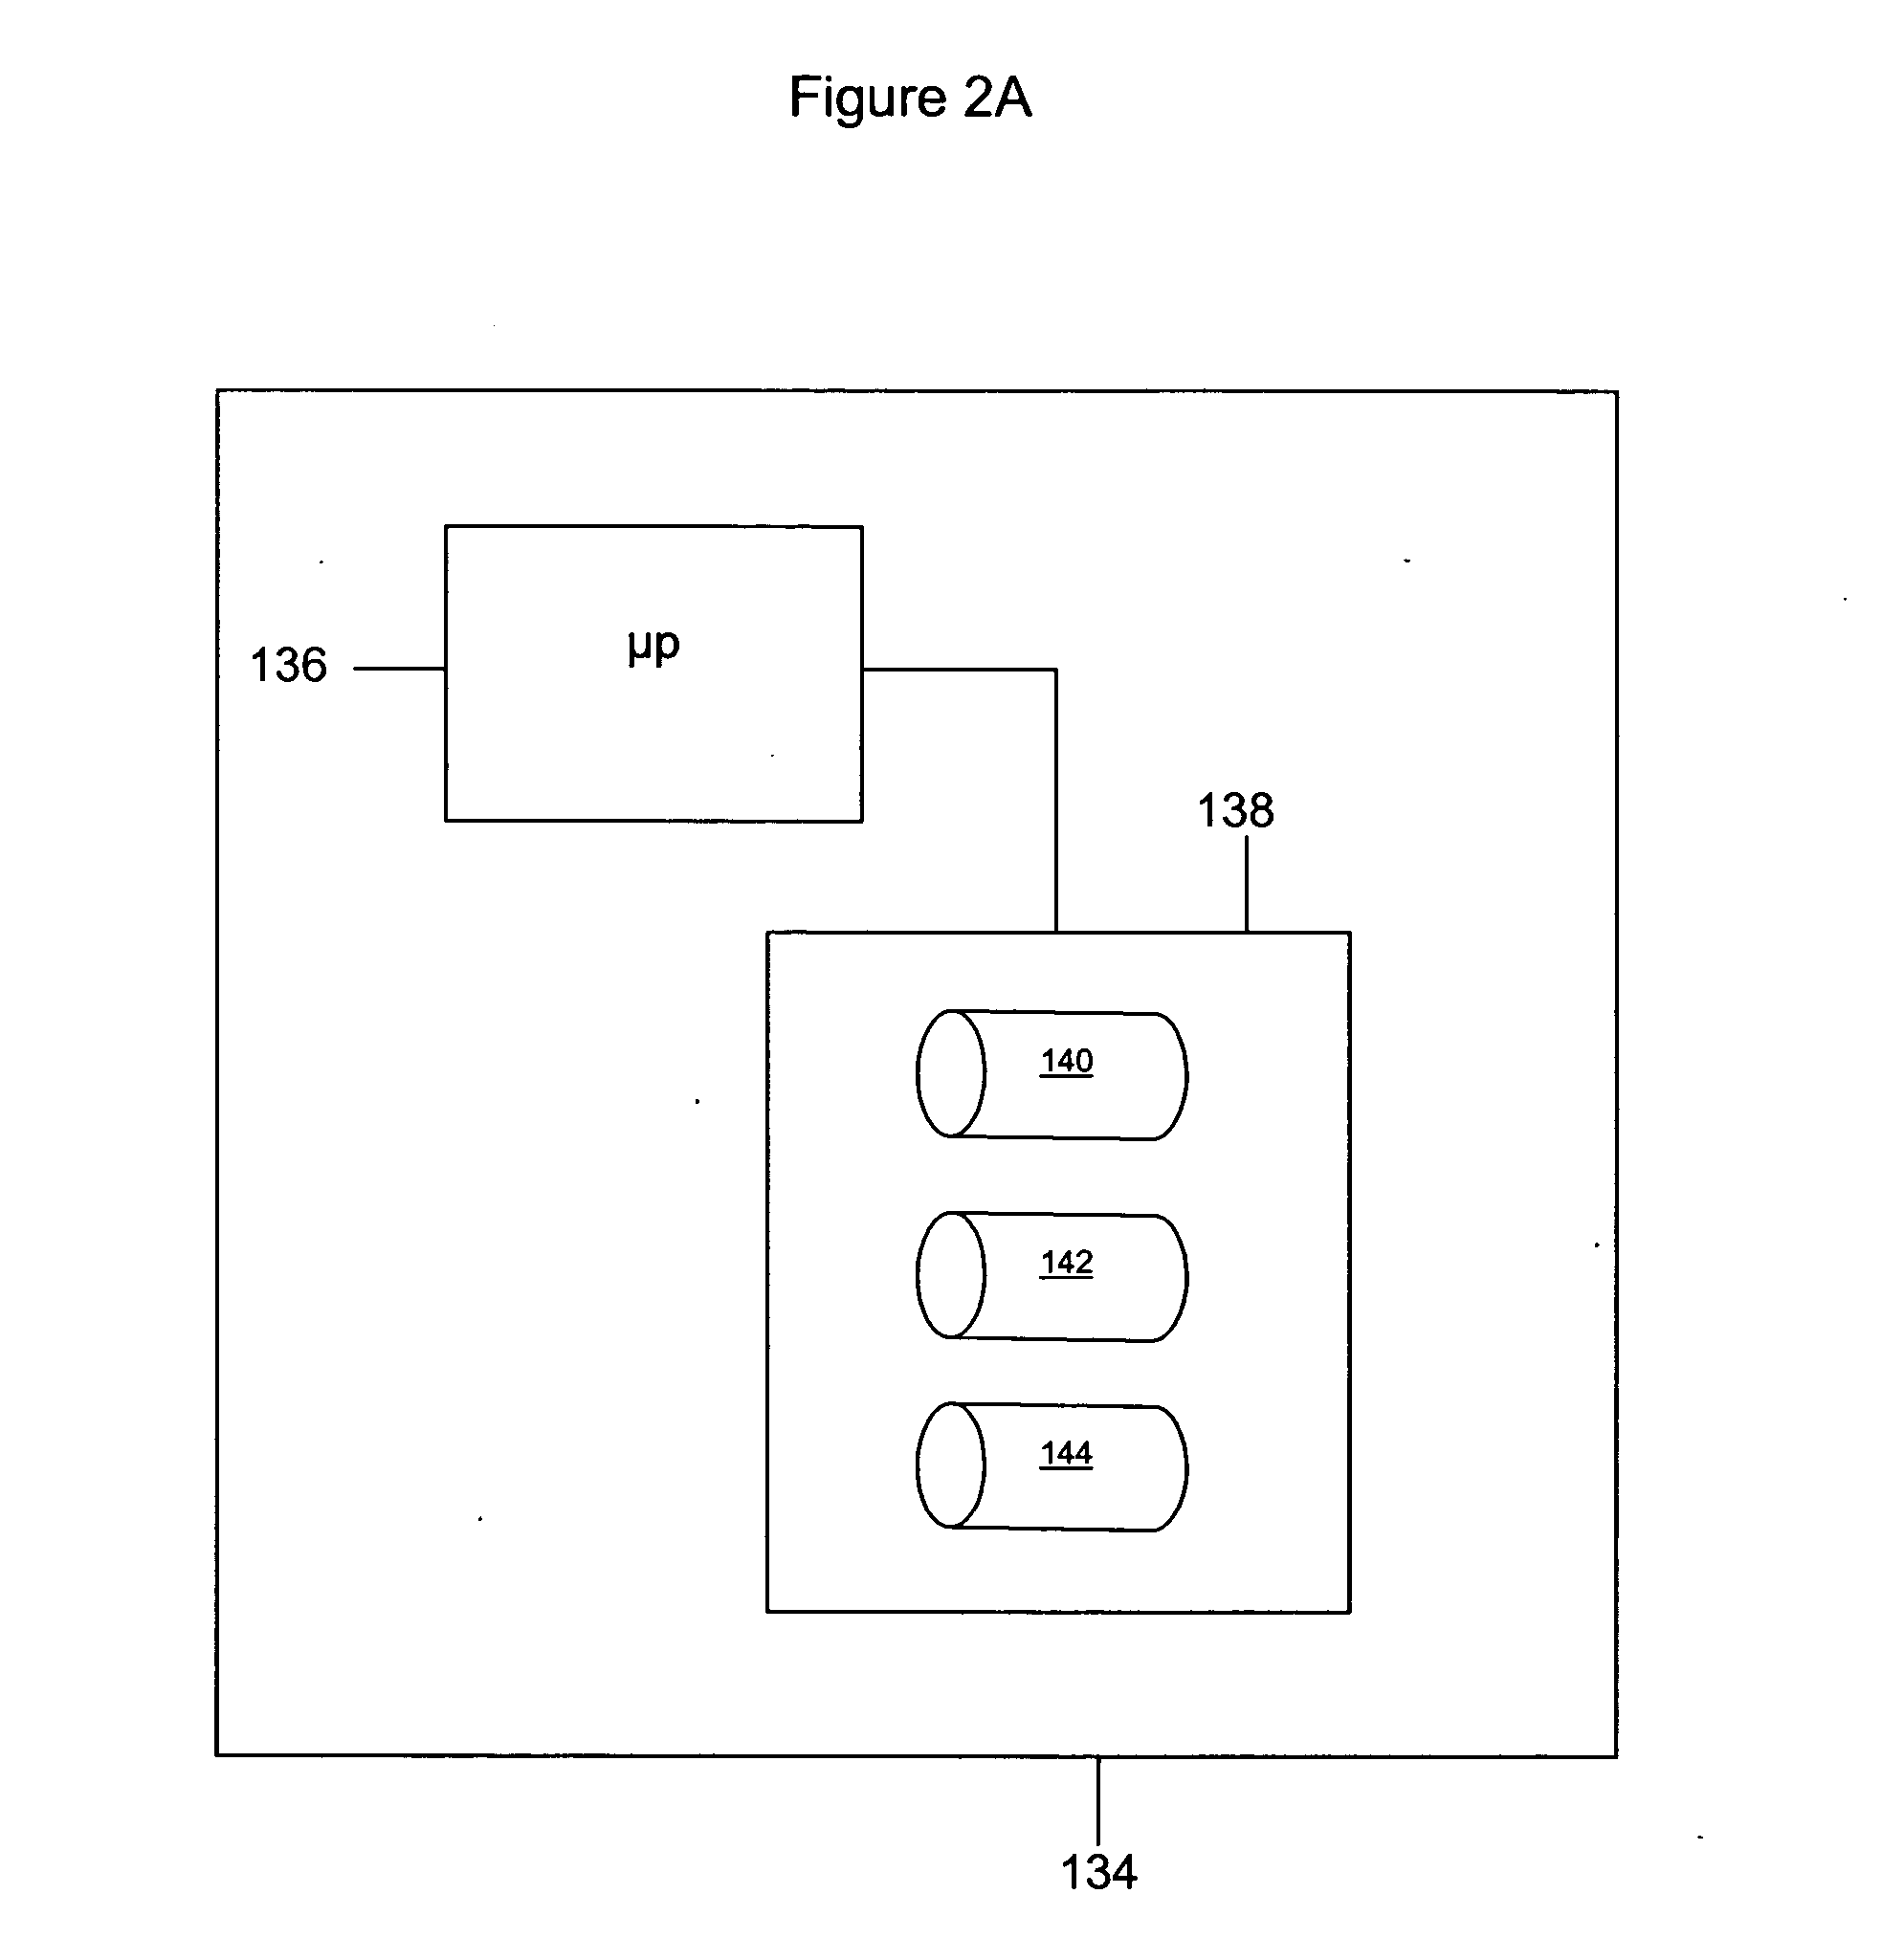 System and method for distributing payments between multiple accounts